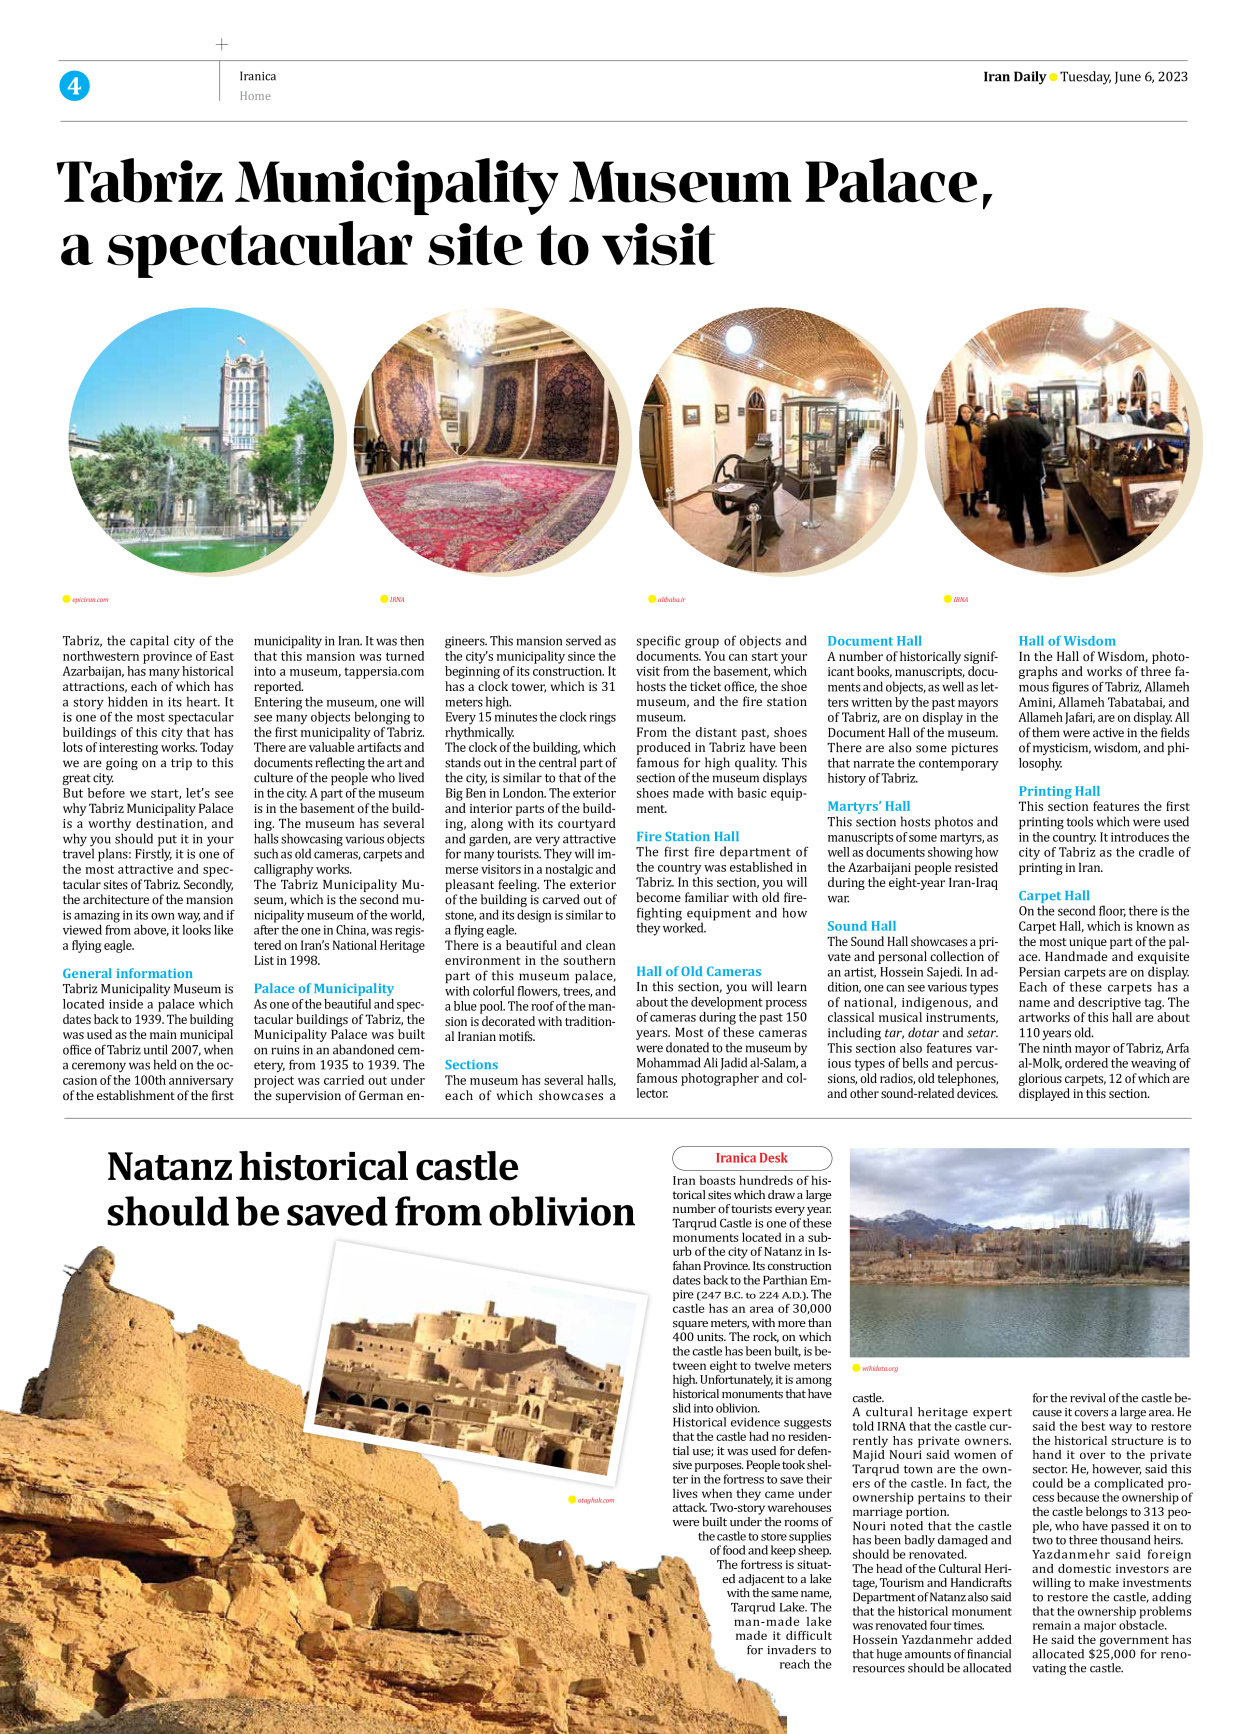 Iran Daily - Number Seven Thousand Three Hundred and Seven - 06 June 2023 - Page 4